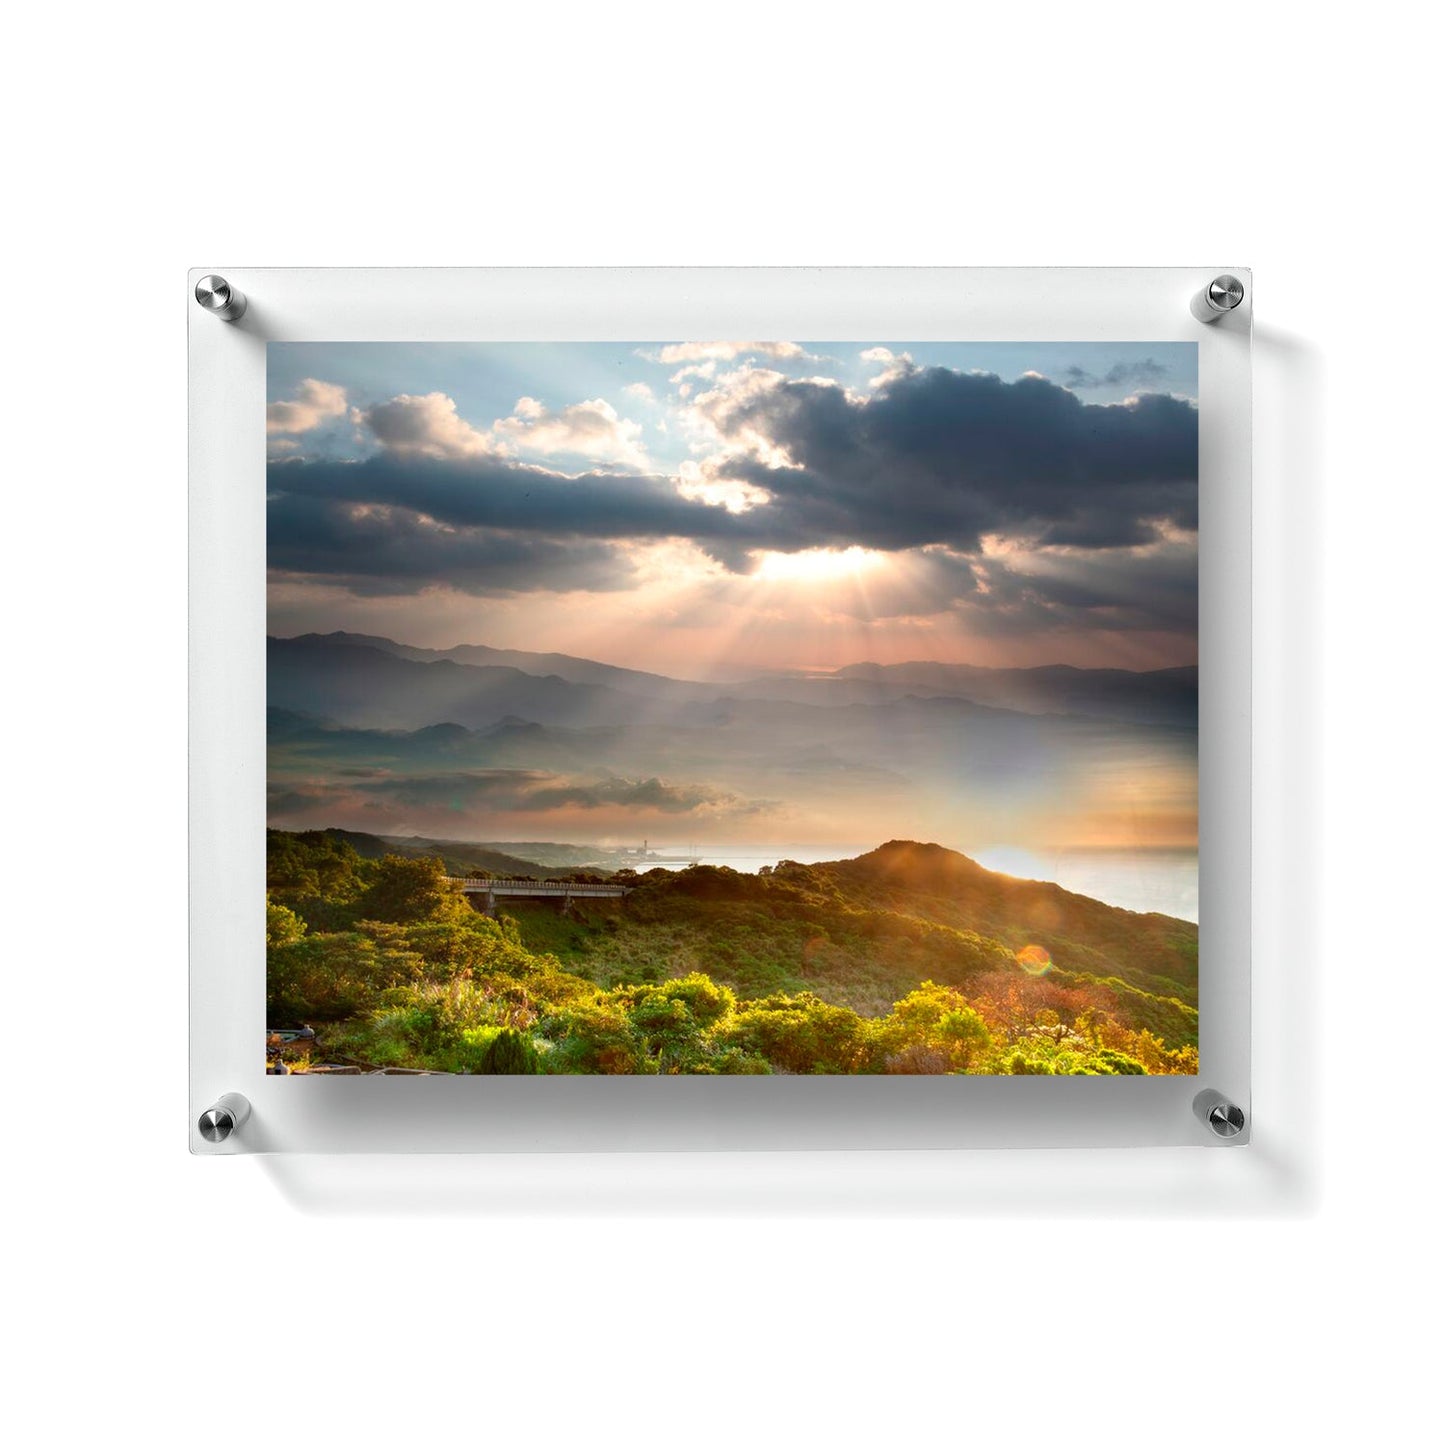 WS Double: 15" x 18" Double Panel Frame